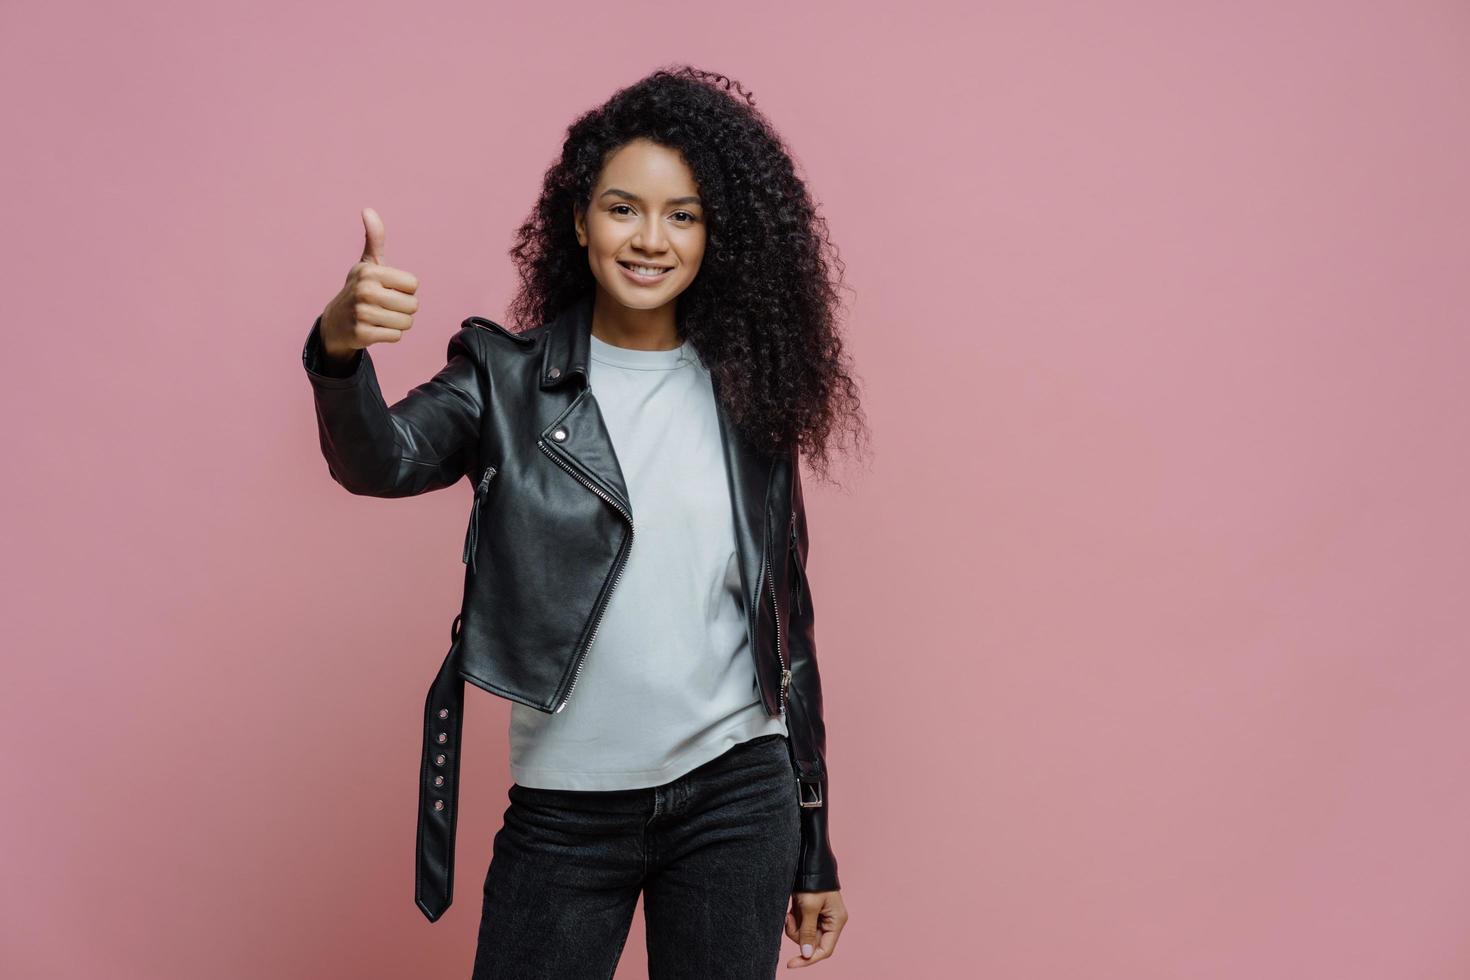 Pleased curly haired woman keeps thumb up, makes approval gesture, dressed in white t shirt, stylish leather jacket and jeans, poses against pink background. Body language concept photo